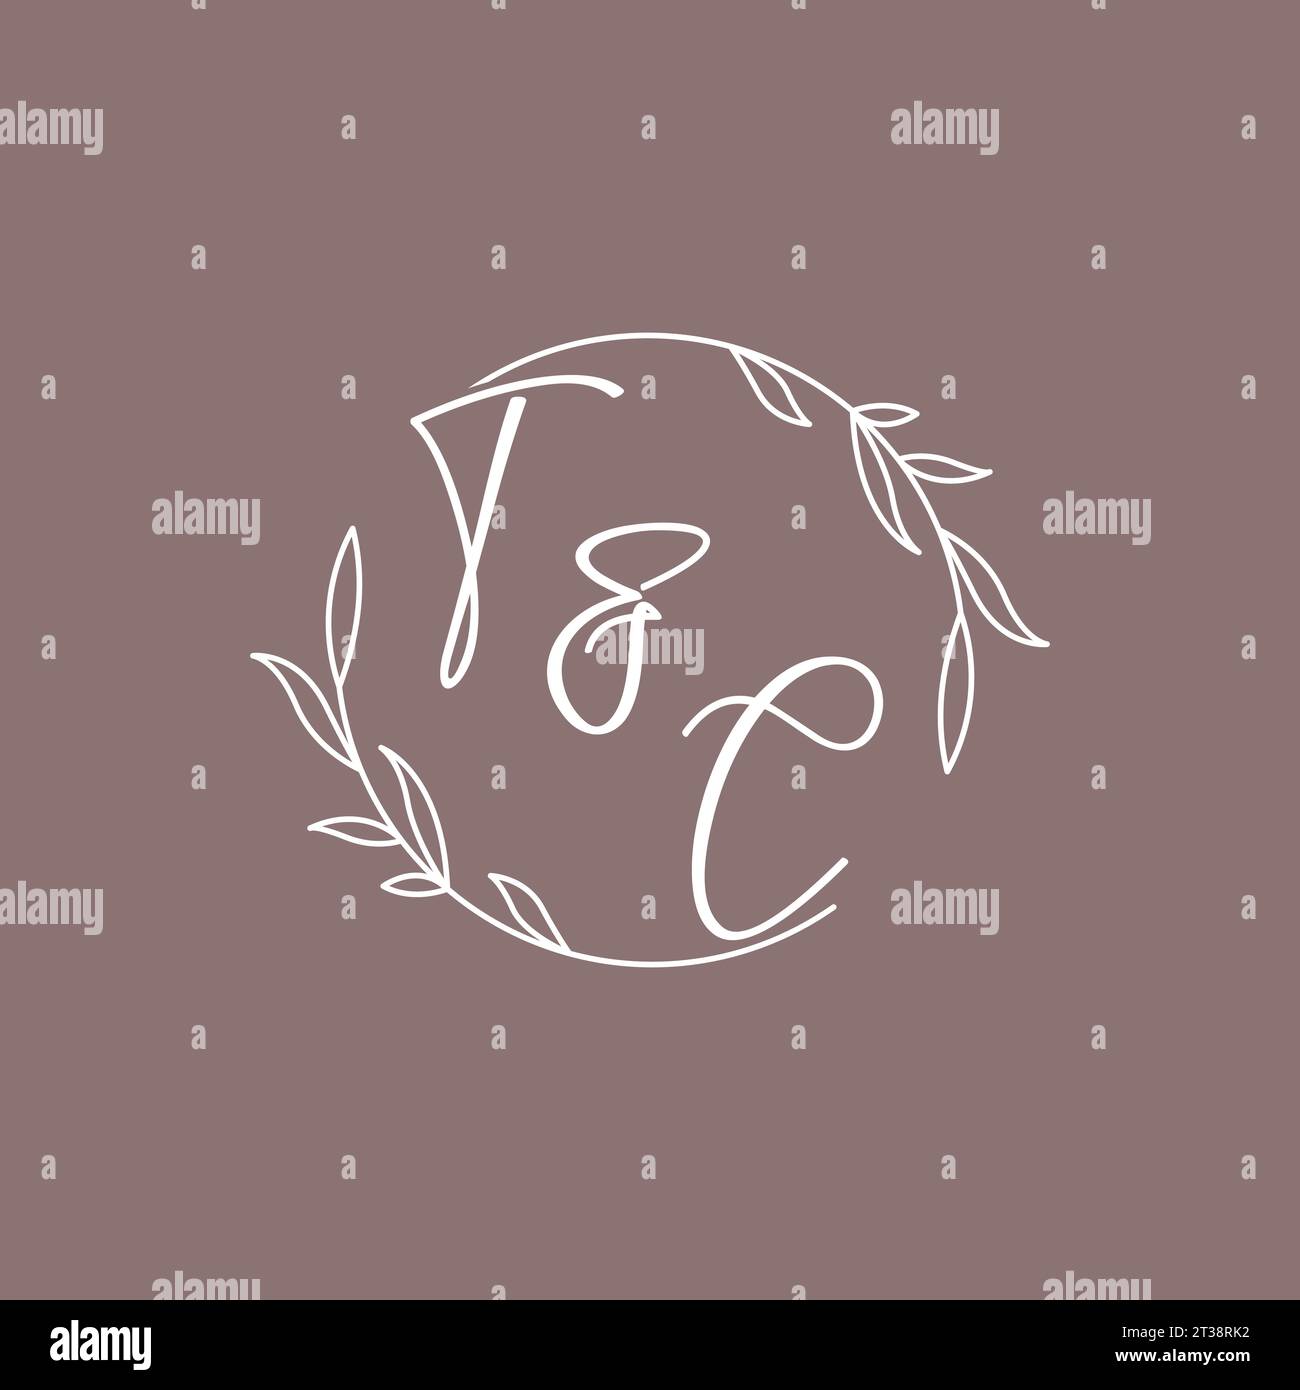 TC Monogram Shadow Shape Style Stock Vector - Illustration of abstract,  vector: 227769988